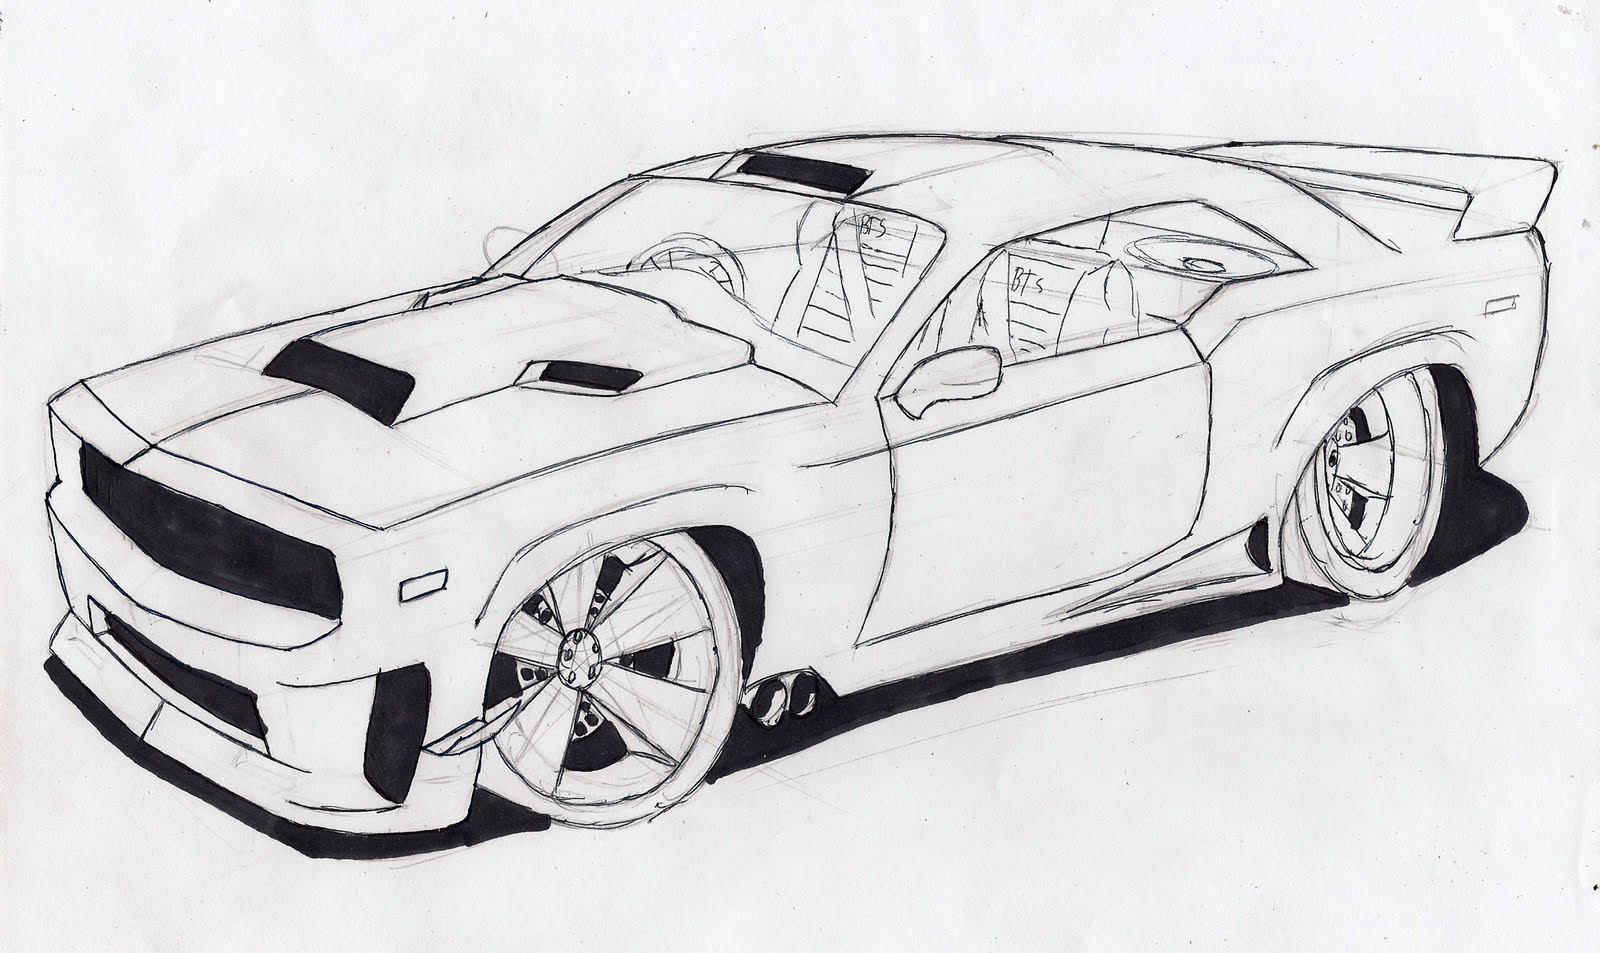 Josiah's Drawings: How to draw a Muscle Car